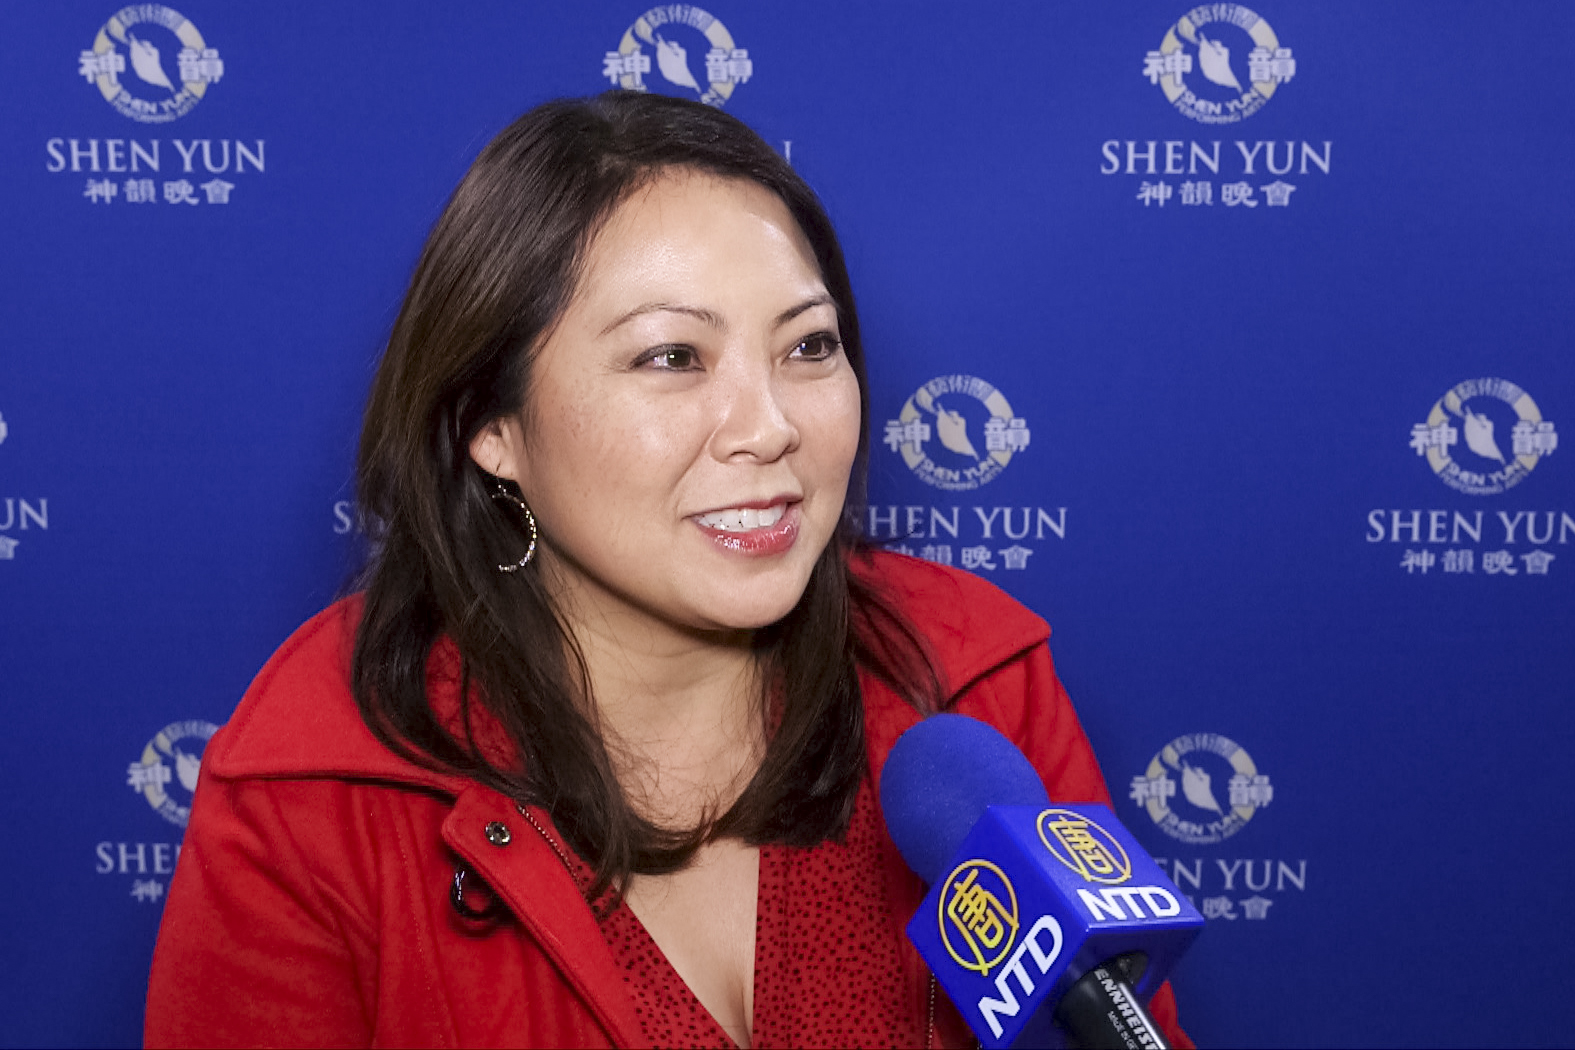 Emmy Winning News Anchor: Shen Yun Has 'Exploded Into a Phenomenon'